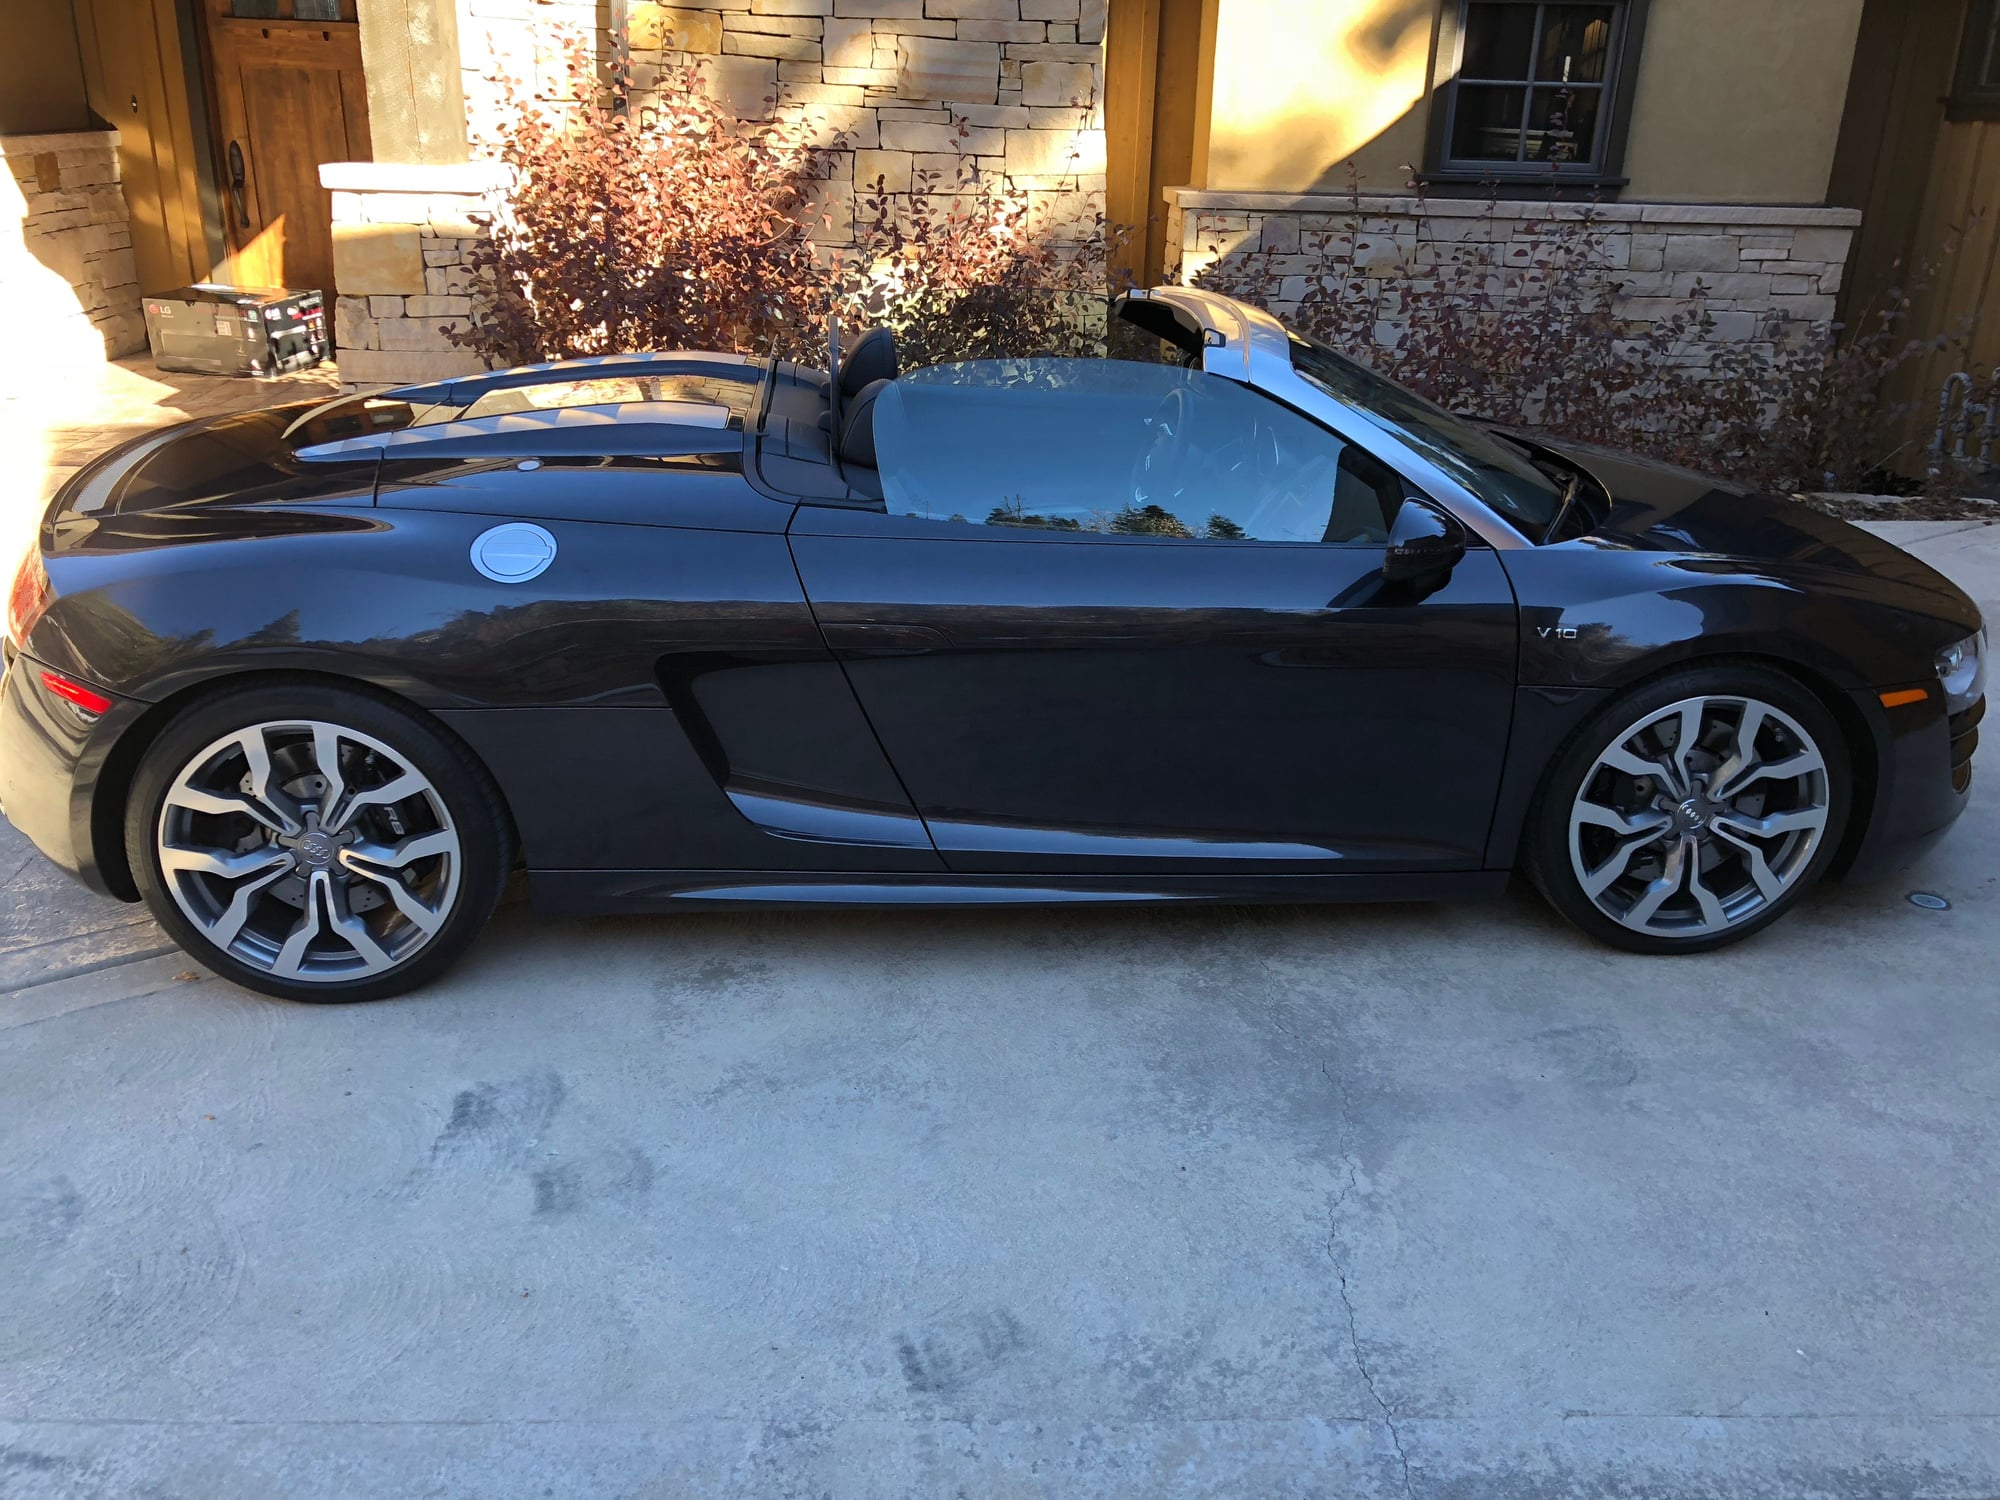 2012 Audi R8 - 2012 R8 Spyder V10 R-Tronic Lava Grey/Black/Carbon/Black - Used - VIN WUAVNAFG3CN001350 - 2,500 Miles - 10 cyl - AWD - Automatic - Convertible - Gray - Park City, UT 84098, United States